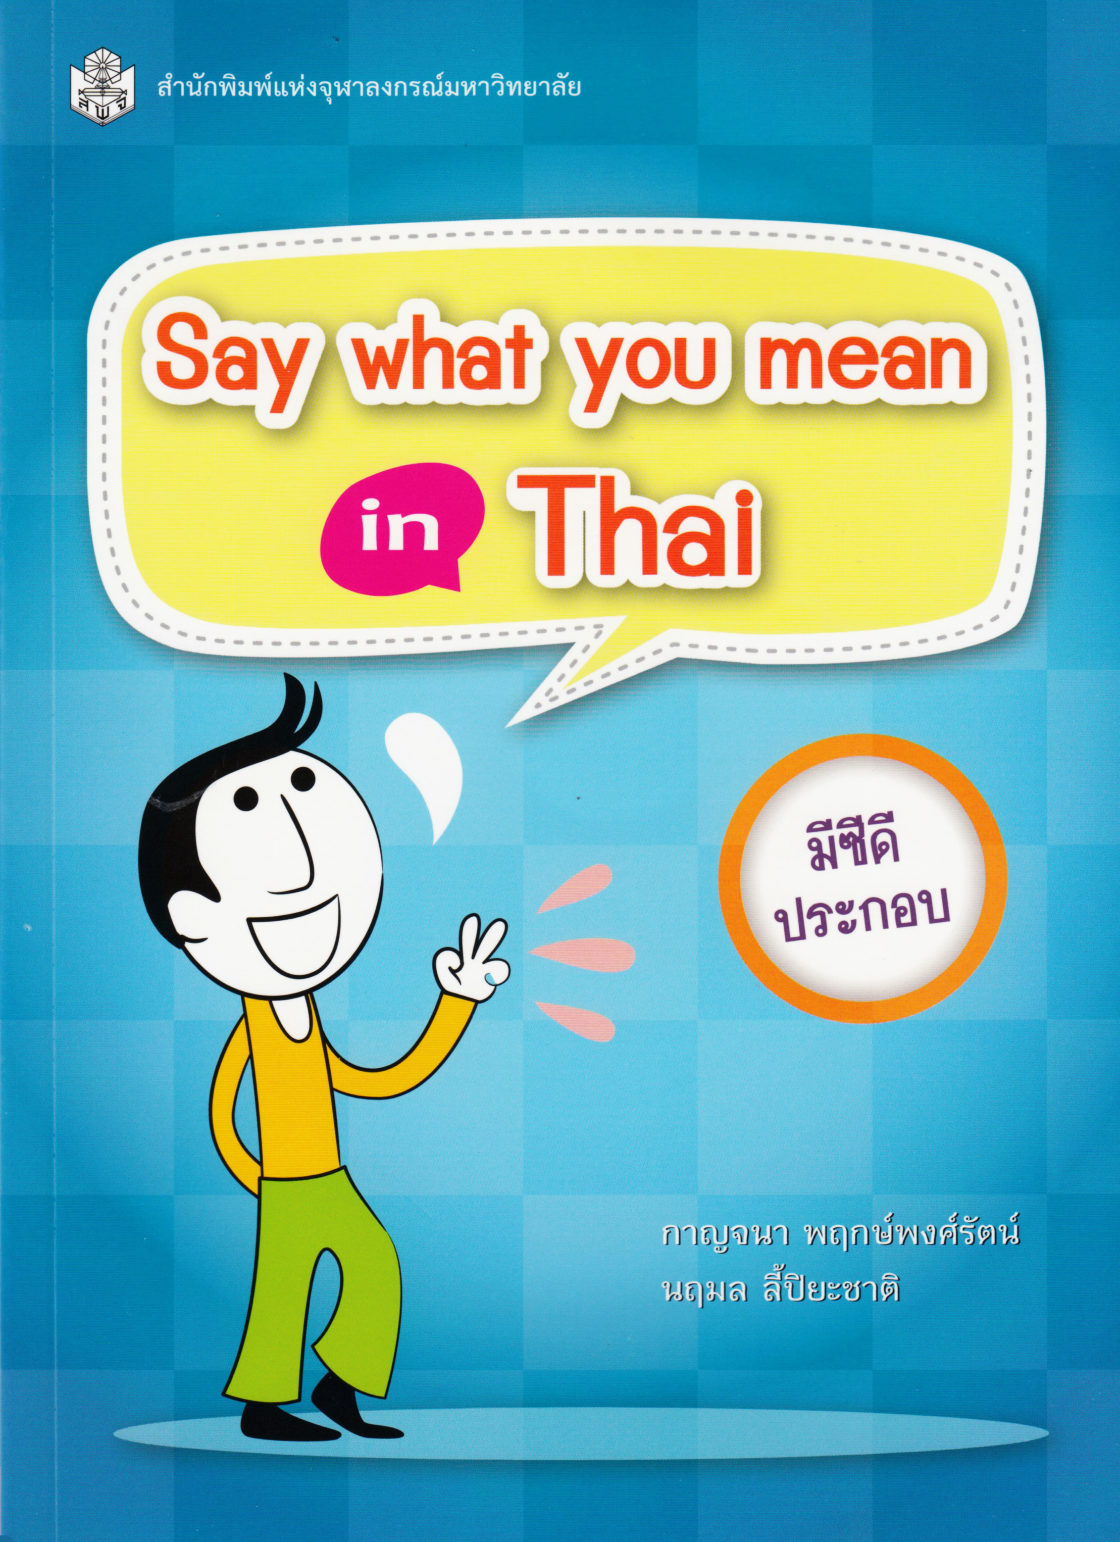 Say what you mean in Thai